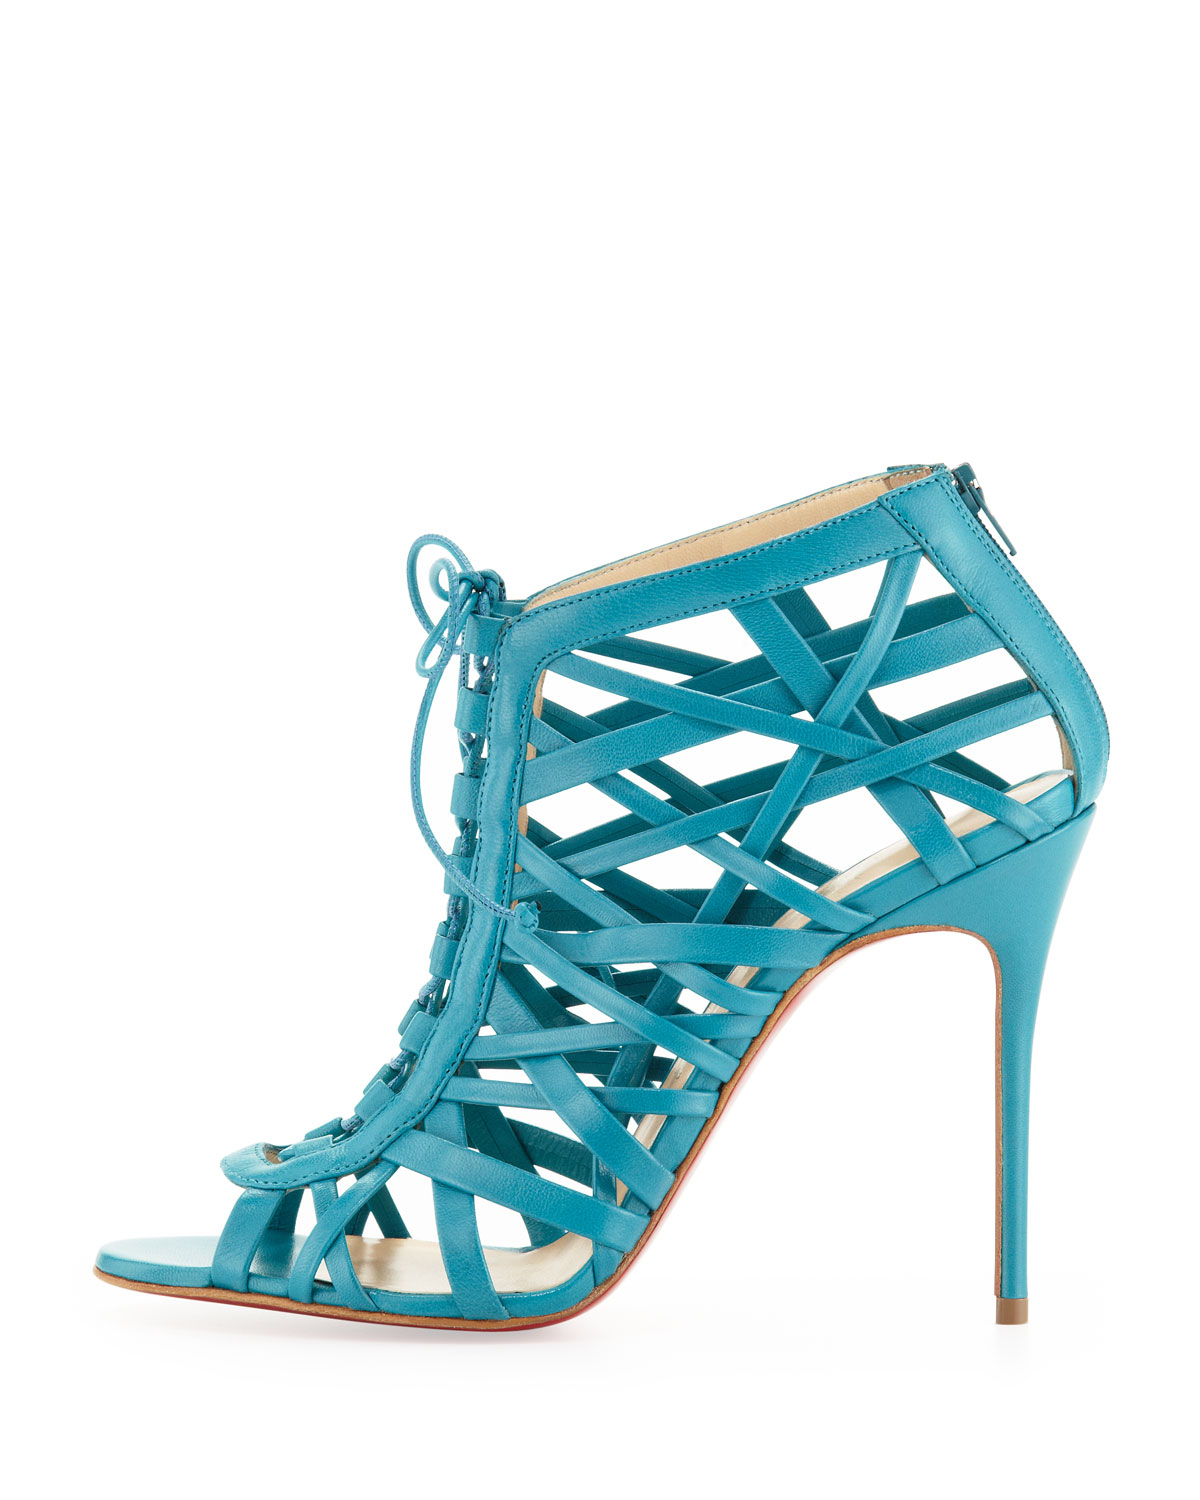 Lyst - Christian Louboutin Laurence Laceup Red Sole Cage Sandal in Green